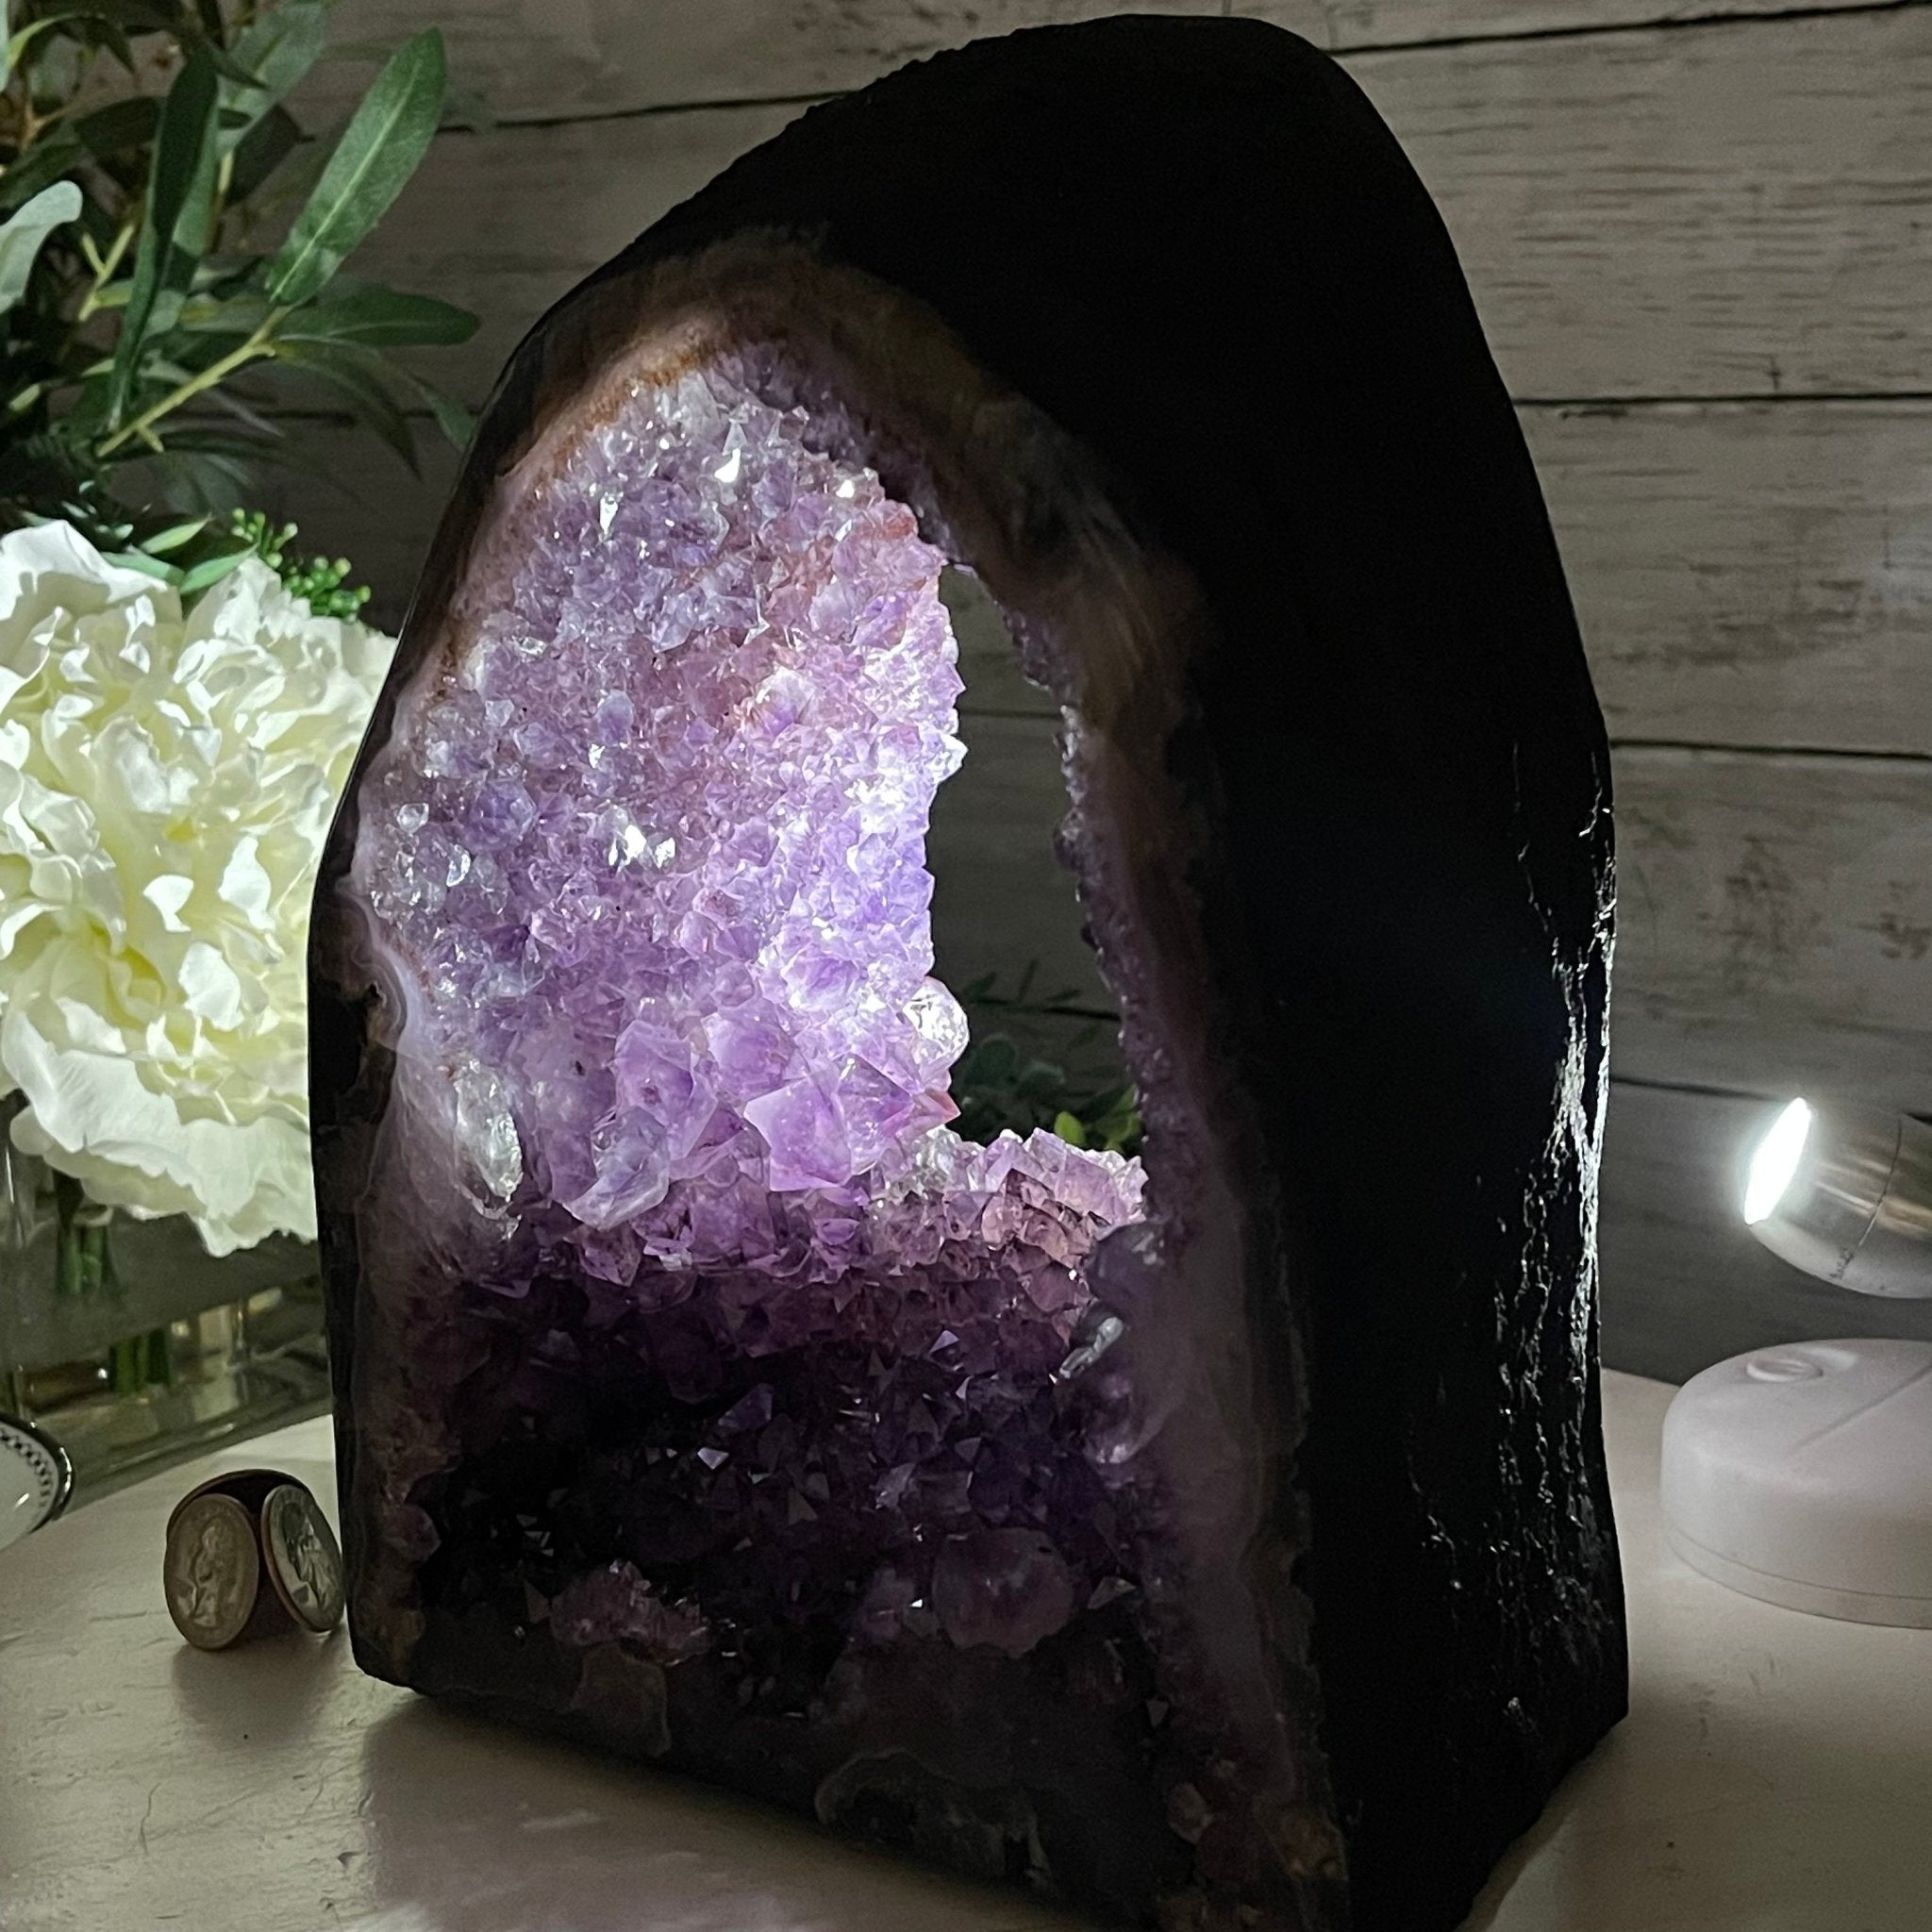 Extra Plus Quality Open 2-Sided Brazilian Amethyst Cathedral, 12.5 lbs, 9.5" tall, #5605-0083 by Brazil Gems - Brazil GemsBrazil GemsExtra Plus Quality Open 2-Sided Brazilian Amethyst Cathedral, 12.5 lbs, 9.5" tall, #5605-0083 by Brazil GemsOpen 2-Sided Cathedrals5605-0083